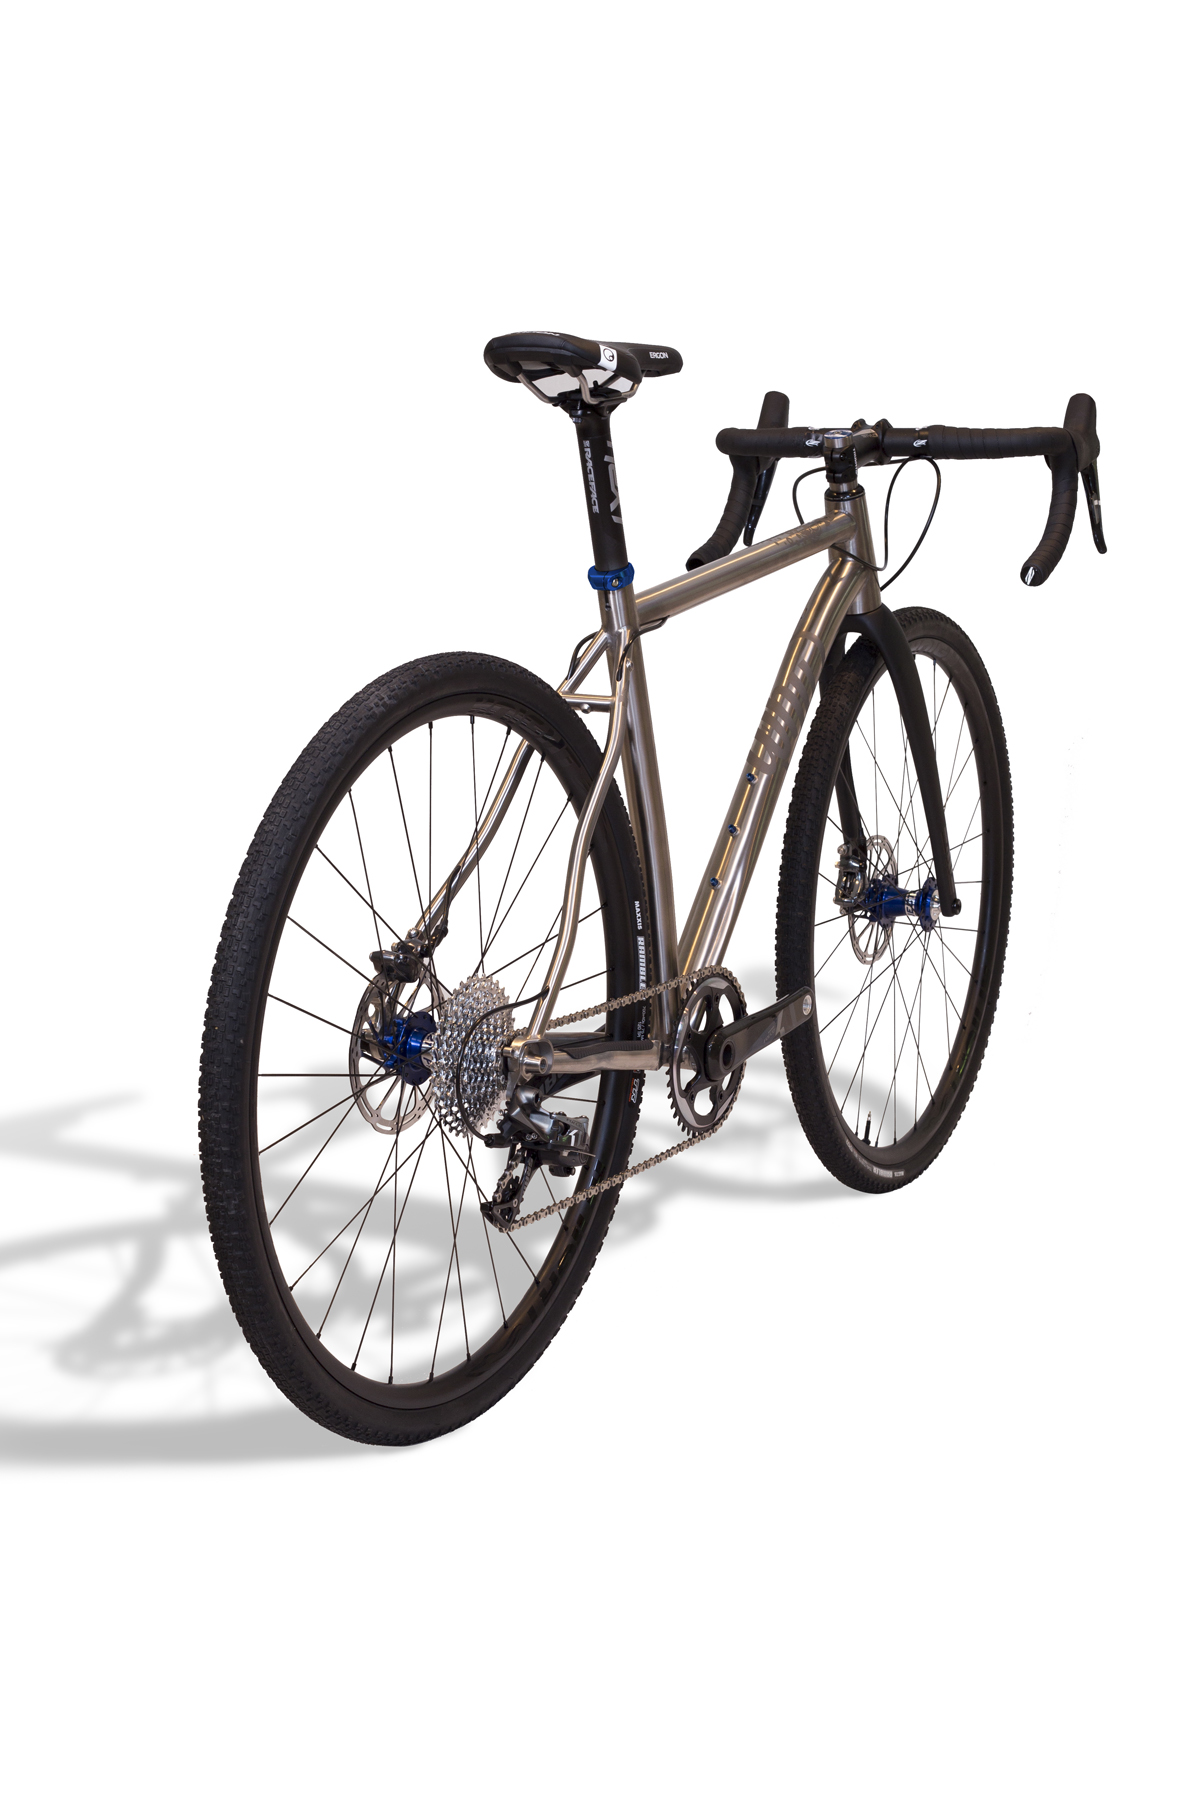 Why Cycles answers their debut question with three different titanium bikes